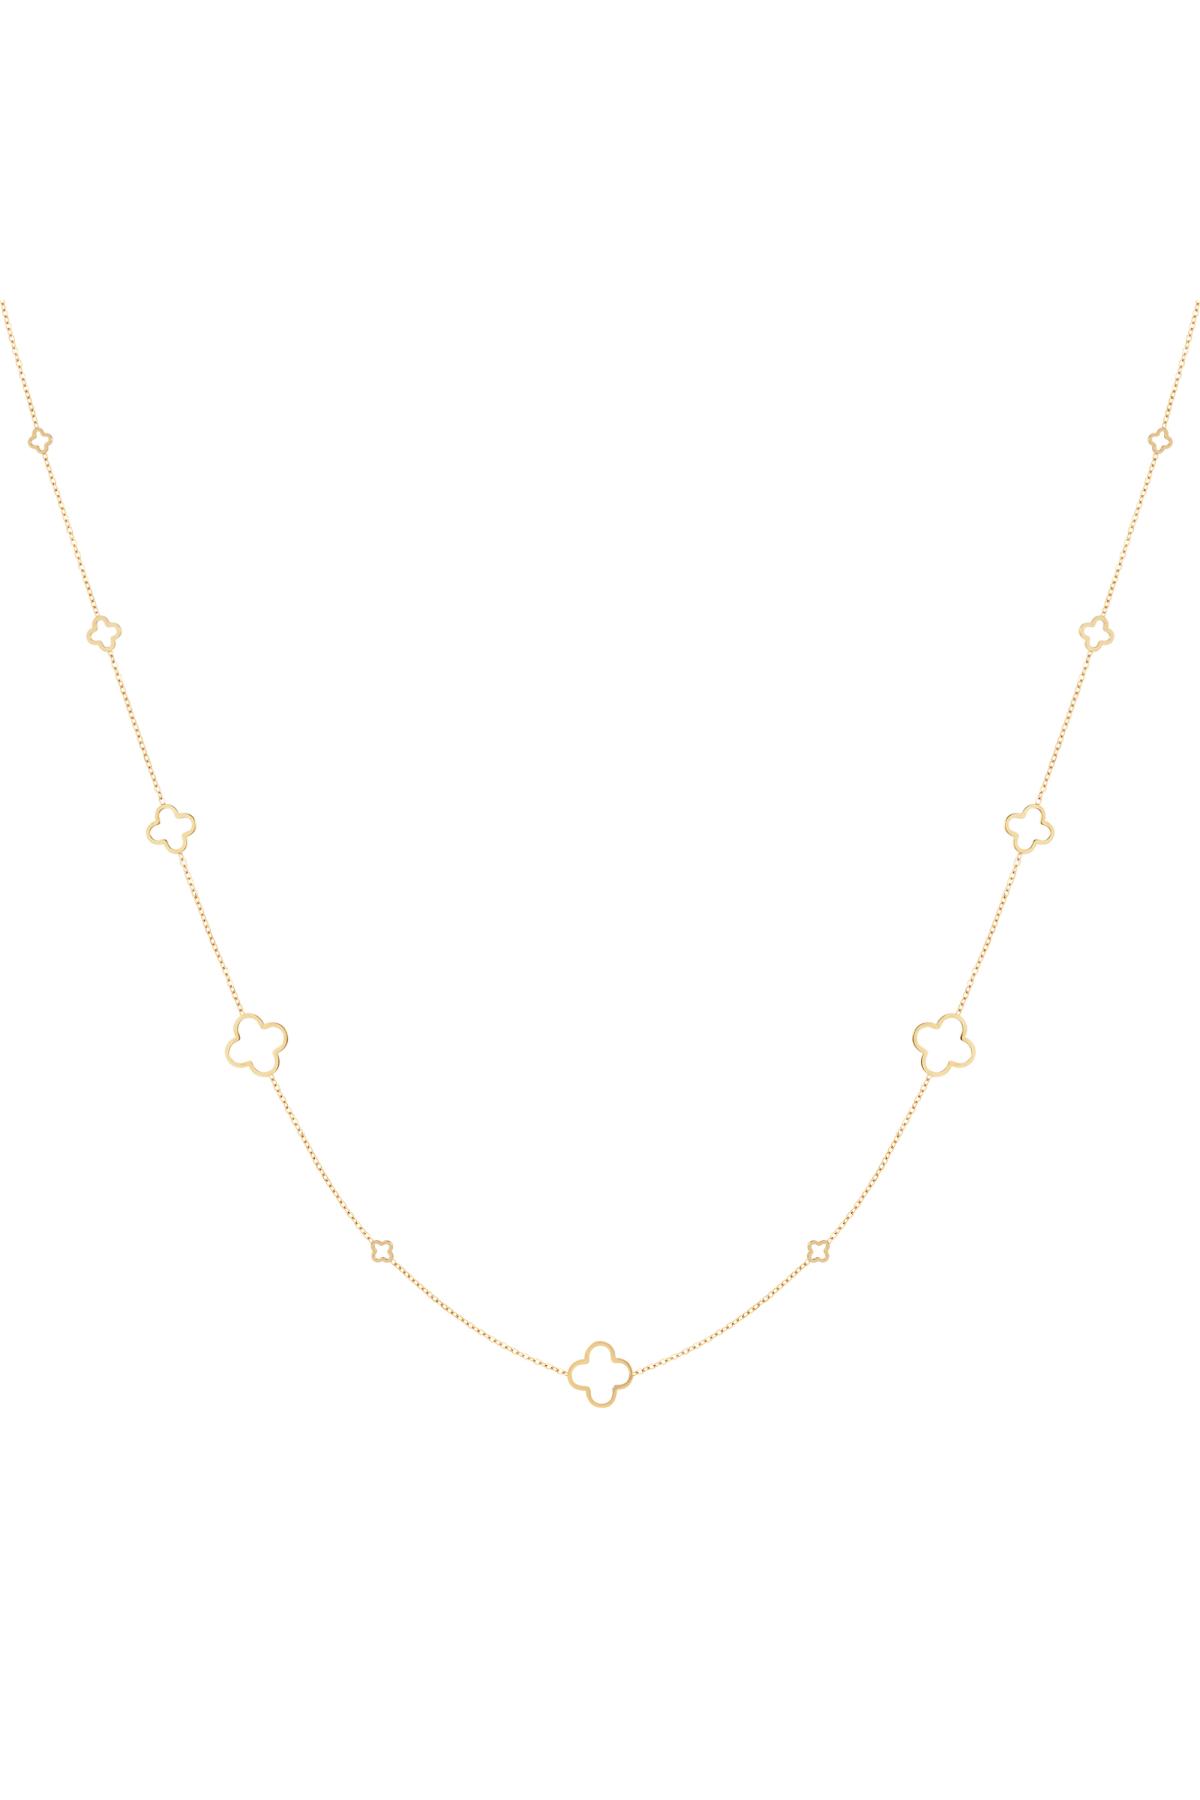 Necklace long clovers Gold Stainless Steel 